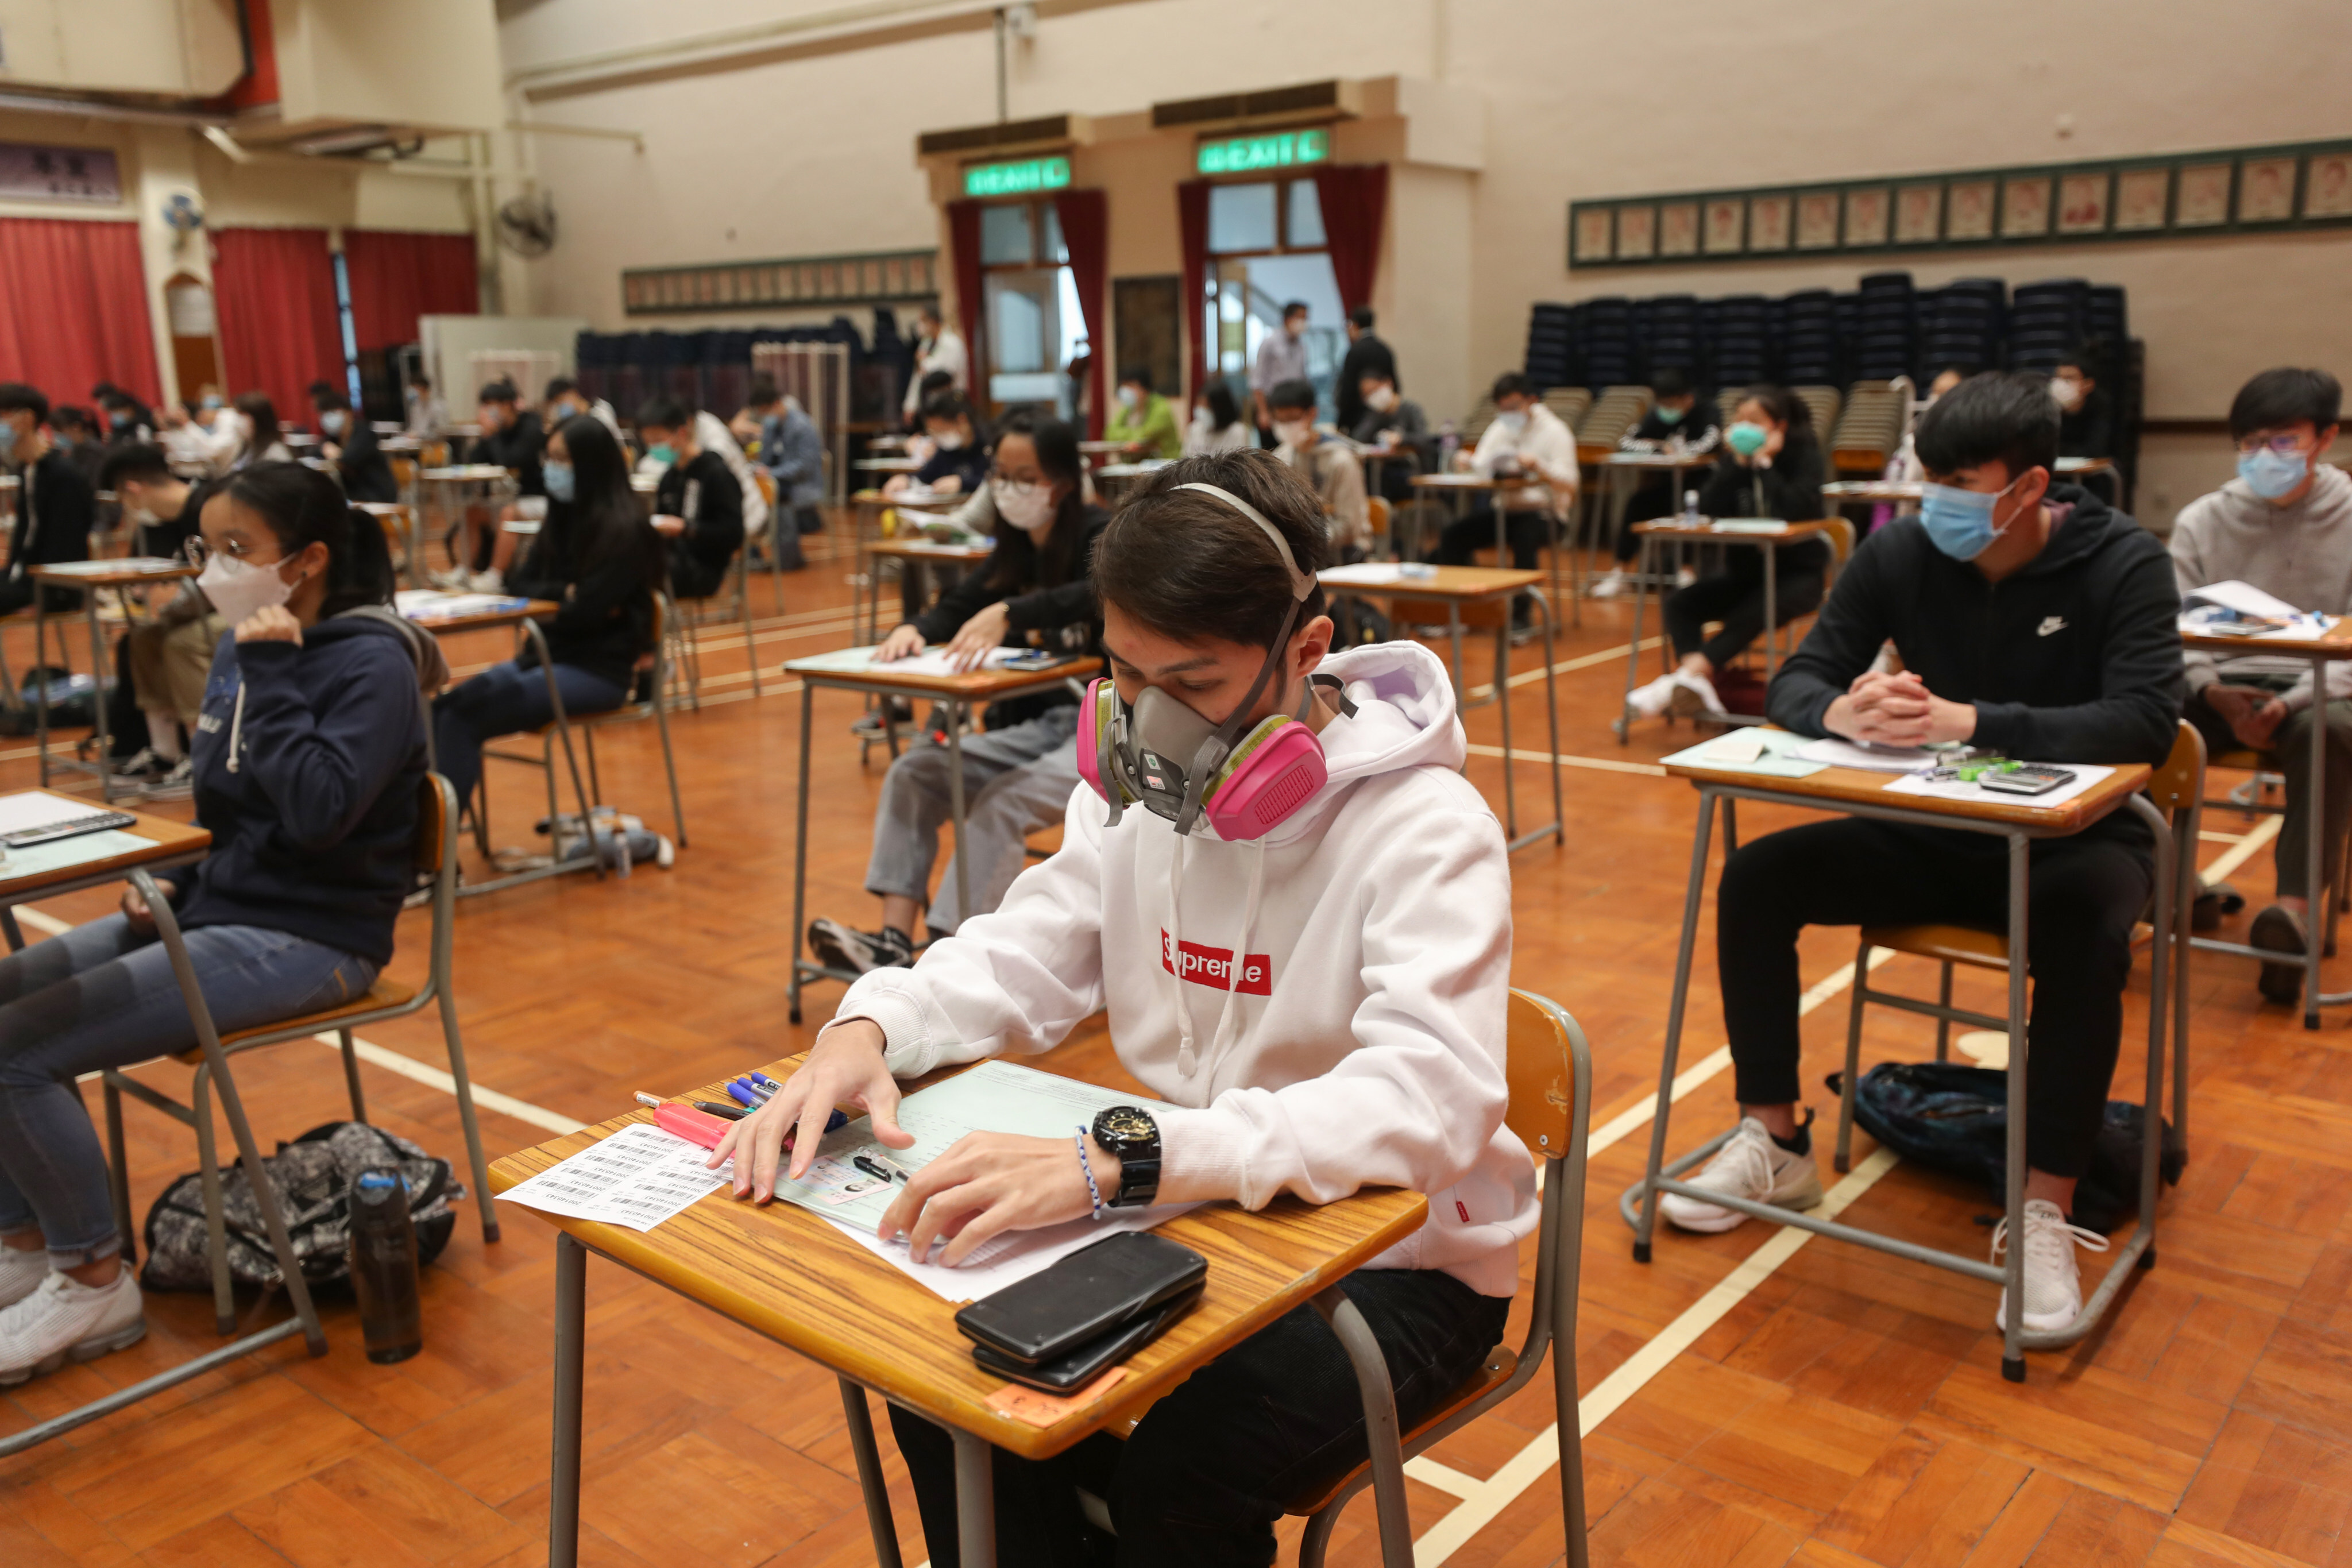 A government source says Hong Kong health authorities have suggested that teachers who have recovered from Covid-19 should supervise all DSE exams. Photo: Xiaomei Chen